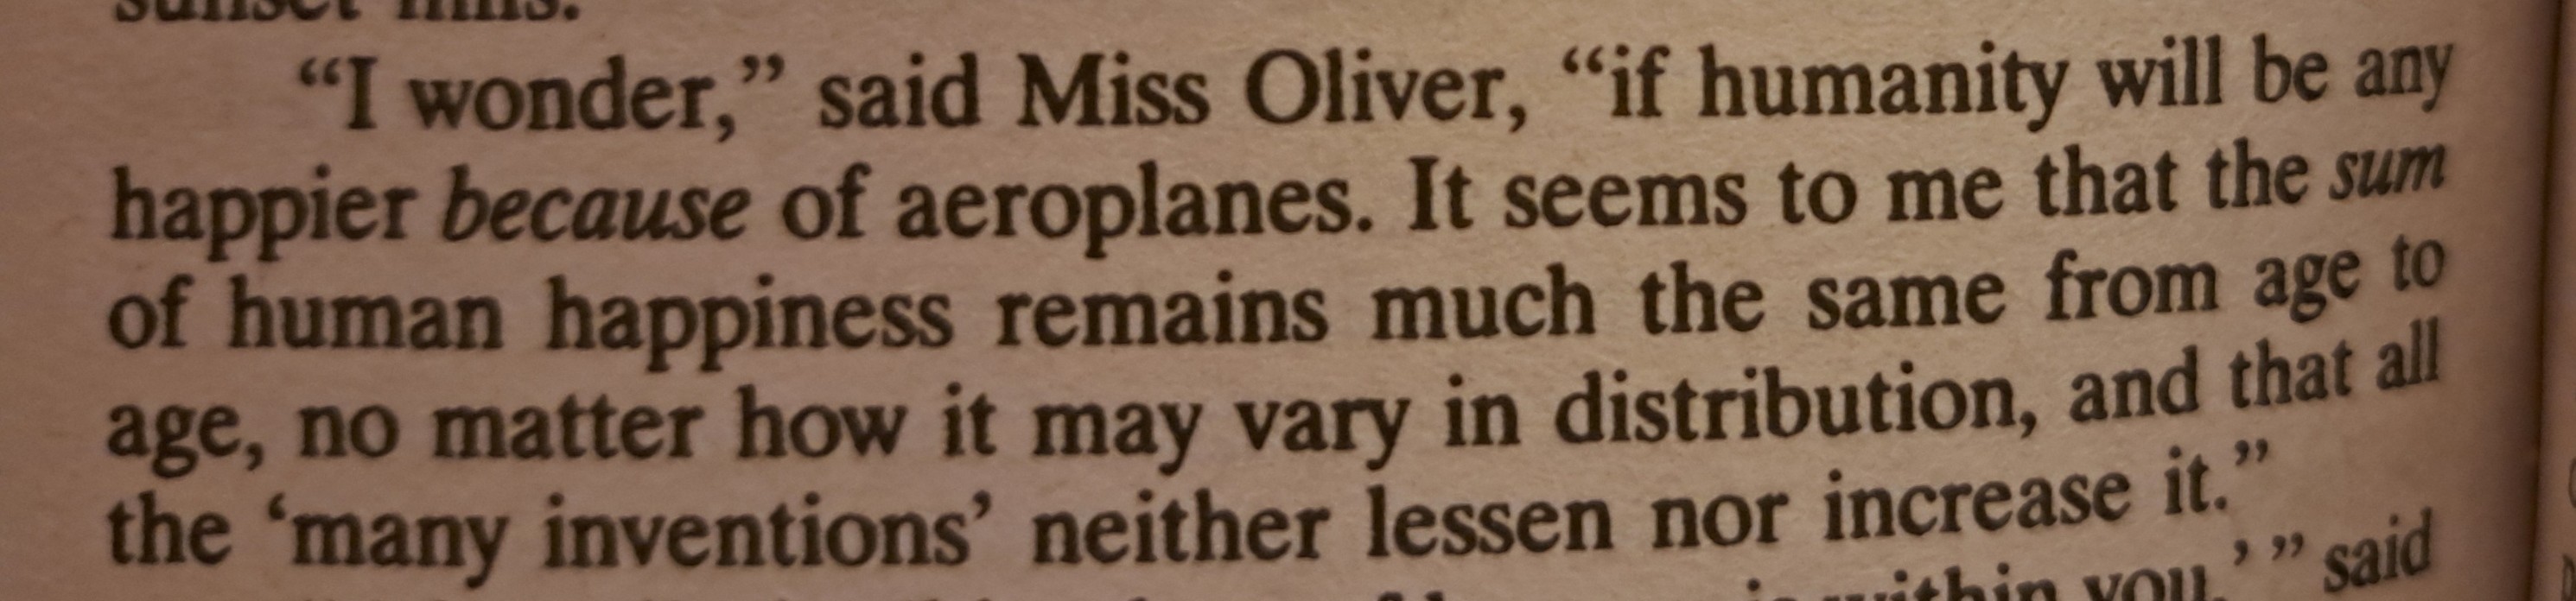 "I wonder," said Miss Oliver, "if humanity will be any happier because of aeroplanes. It seems to me that the sum of human happiness remains much the same from age to age, no matter how it may vary in distribution, and that all the 'many inventions' neither lessen nor increase it."